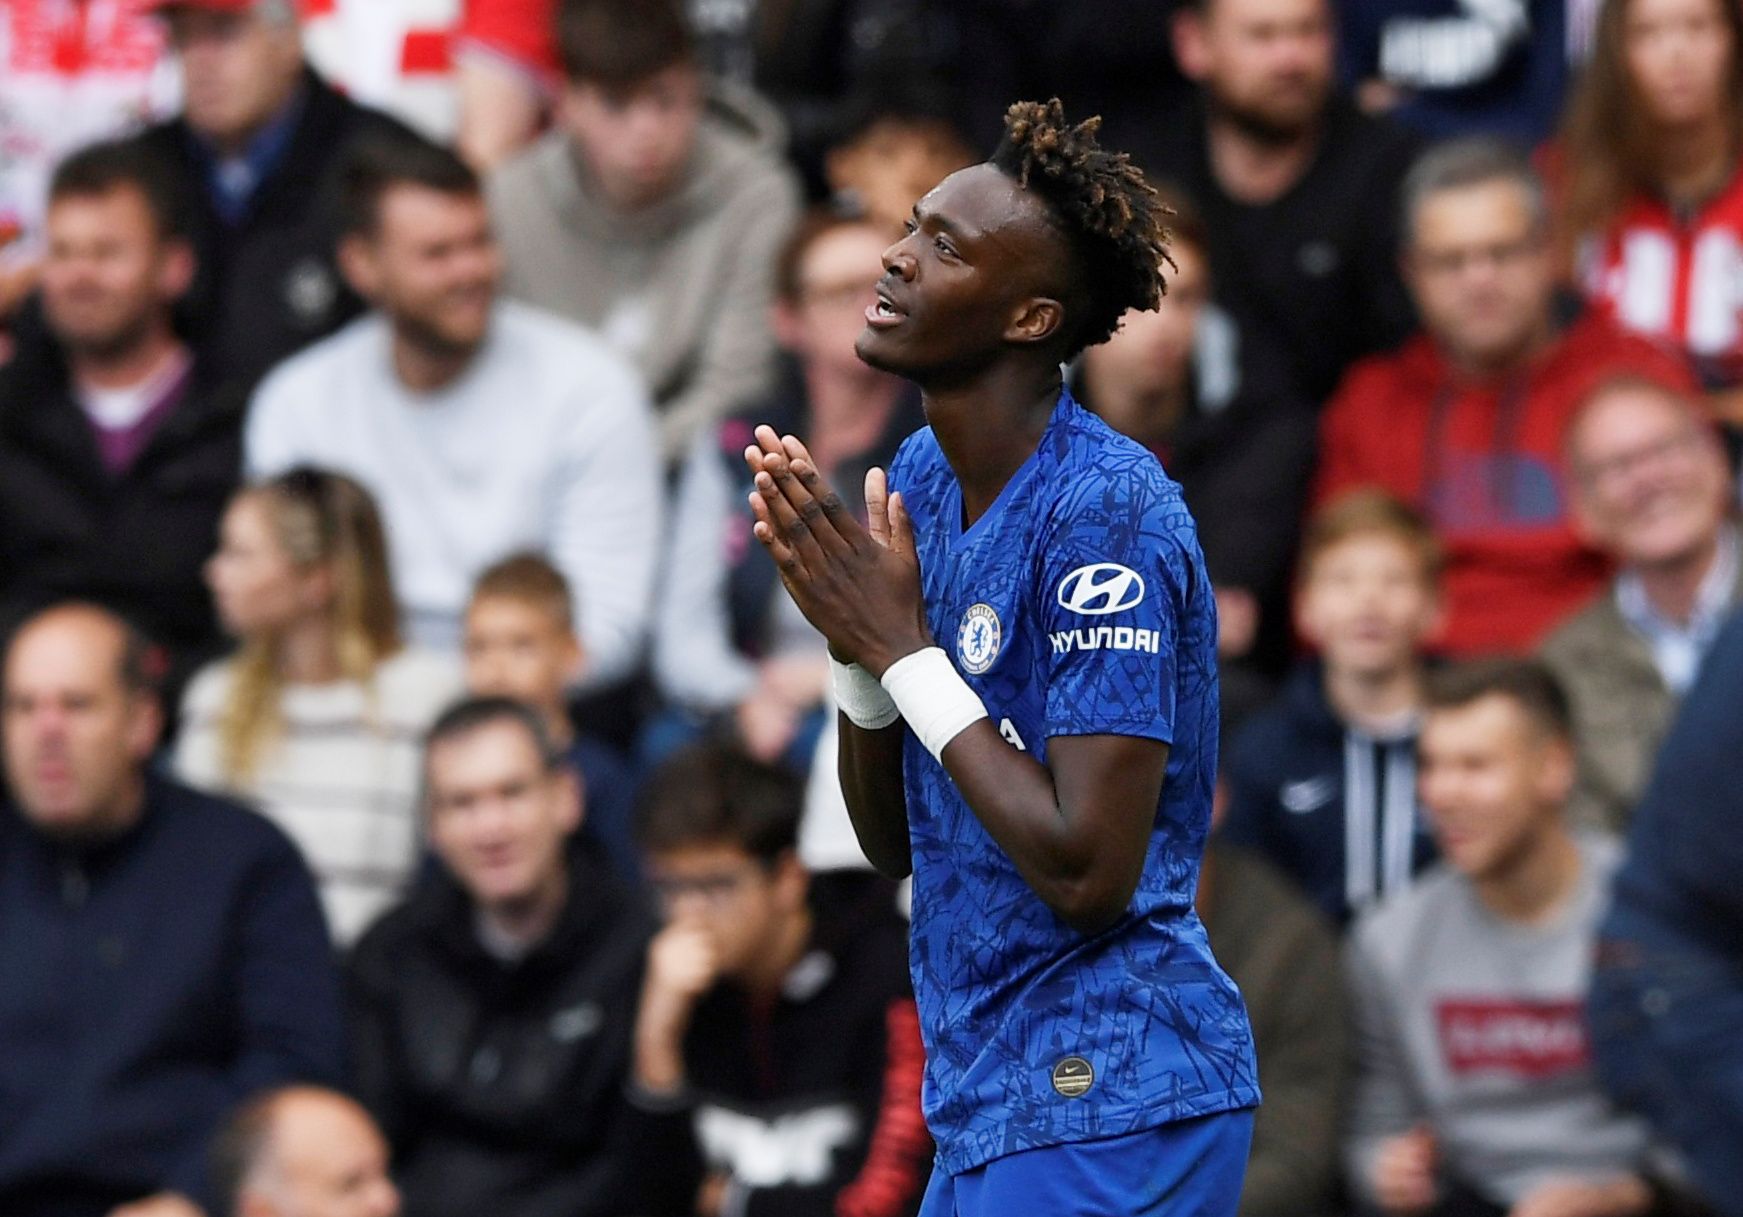 Soccer Football - Premier League - Southampton v Chelsea - St Mary's Stadium, Southampton, Britain - October 6, 2019  Chelsea's Tammy Abraham celebrates scoring their first goal   Action Images via Reuters/Tony O'Brien  EDITORIAL USE ONLY. No use with unauthorized audio, video, data, fixture lists, club/league logos or 